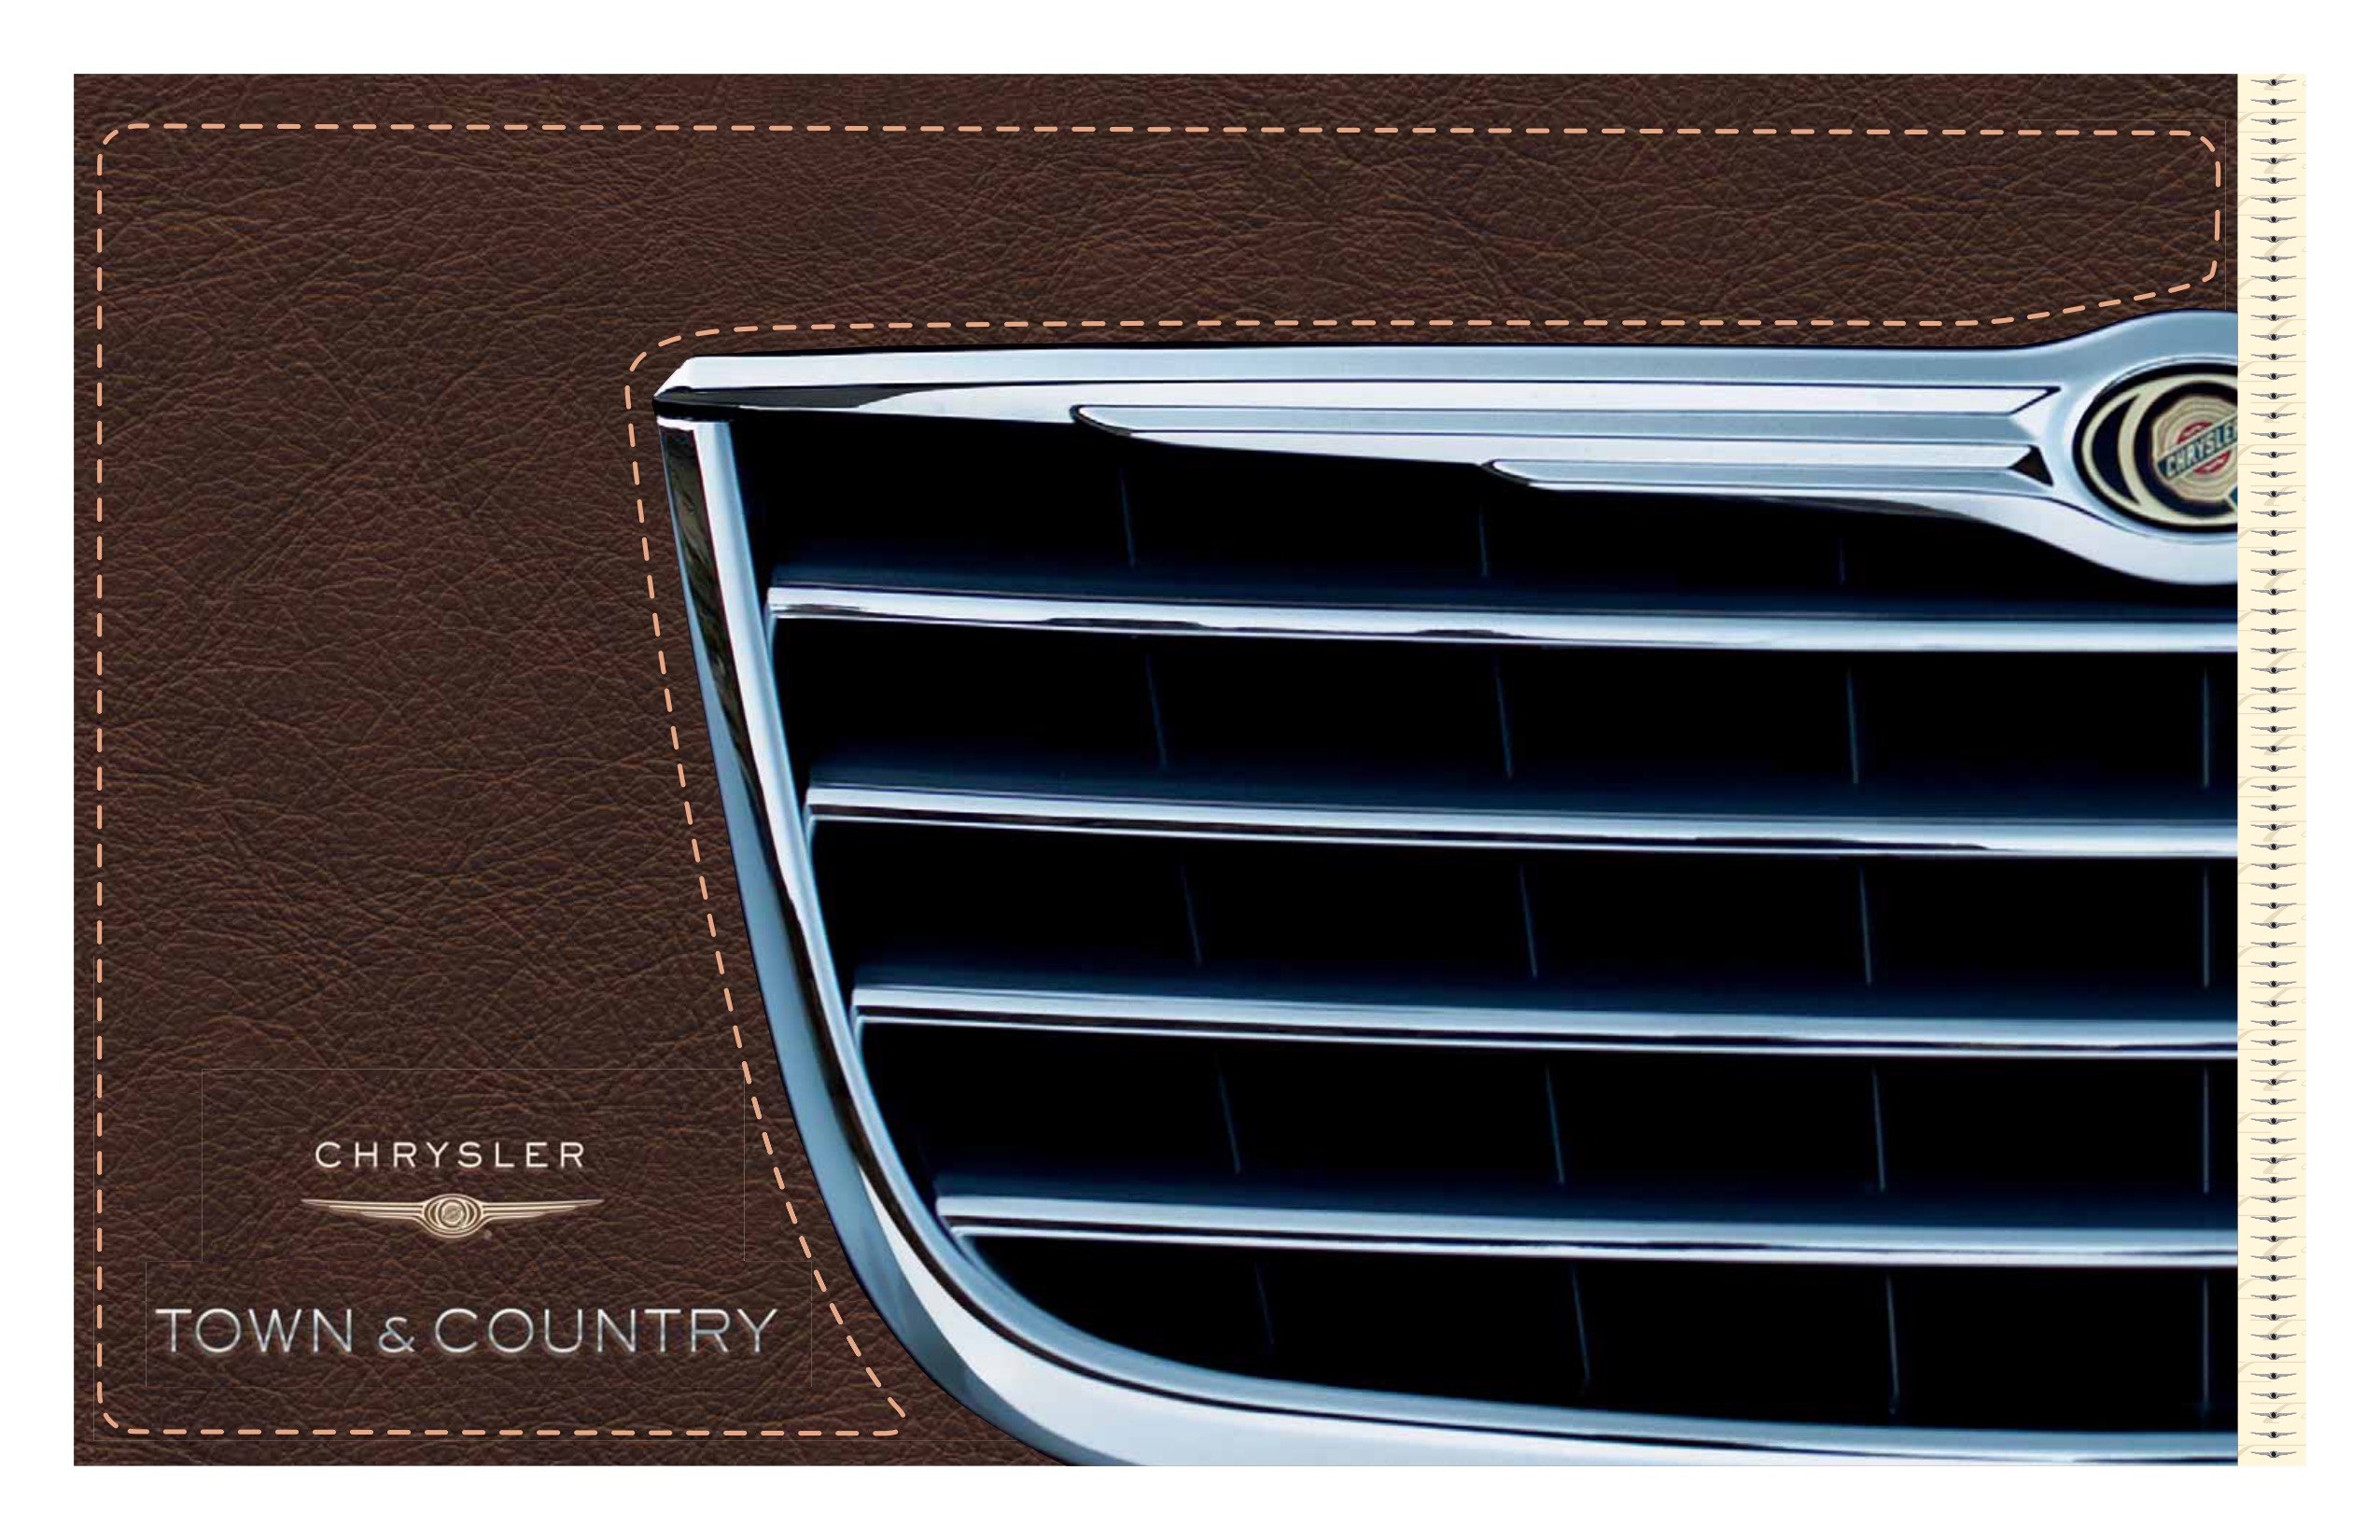 2010 Chrysler Town & Country Brochure Page 6